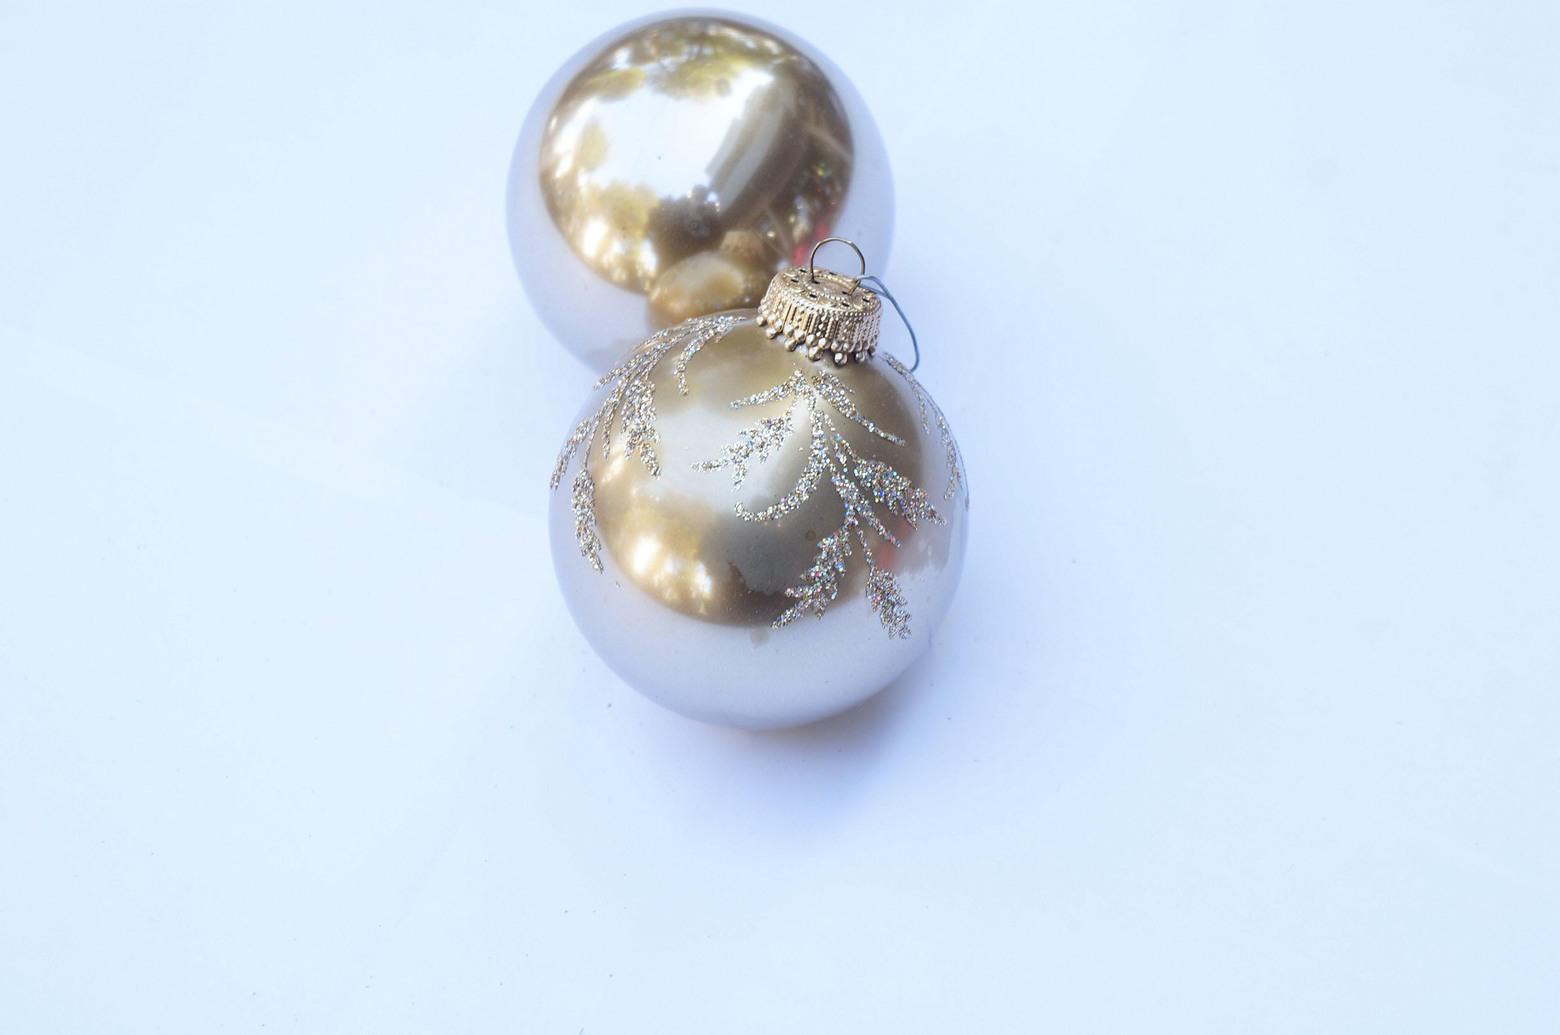 Vintage Blown Glass Christmas Ball Ornament/ヴィンテージ クリスマス オーナメント 吹きガラス ボール レトロ 6個セット 5